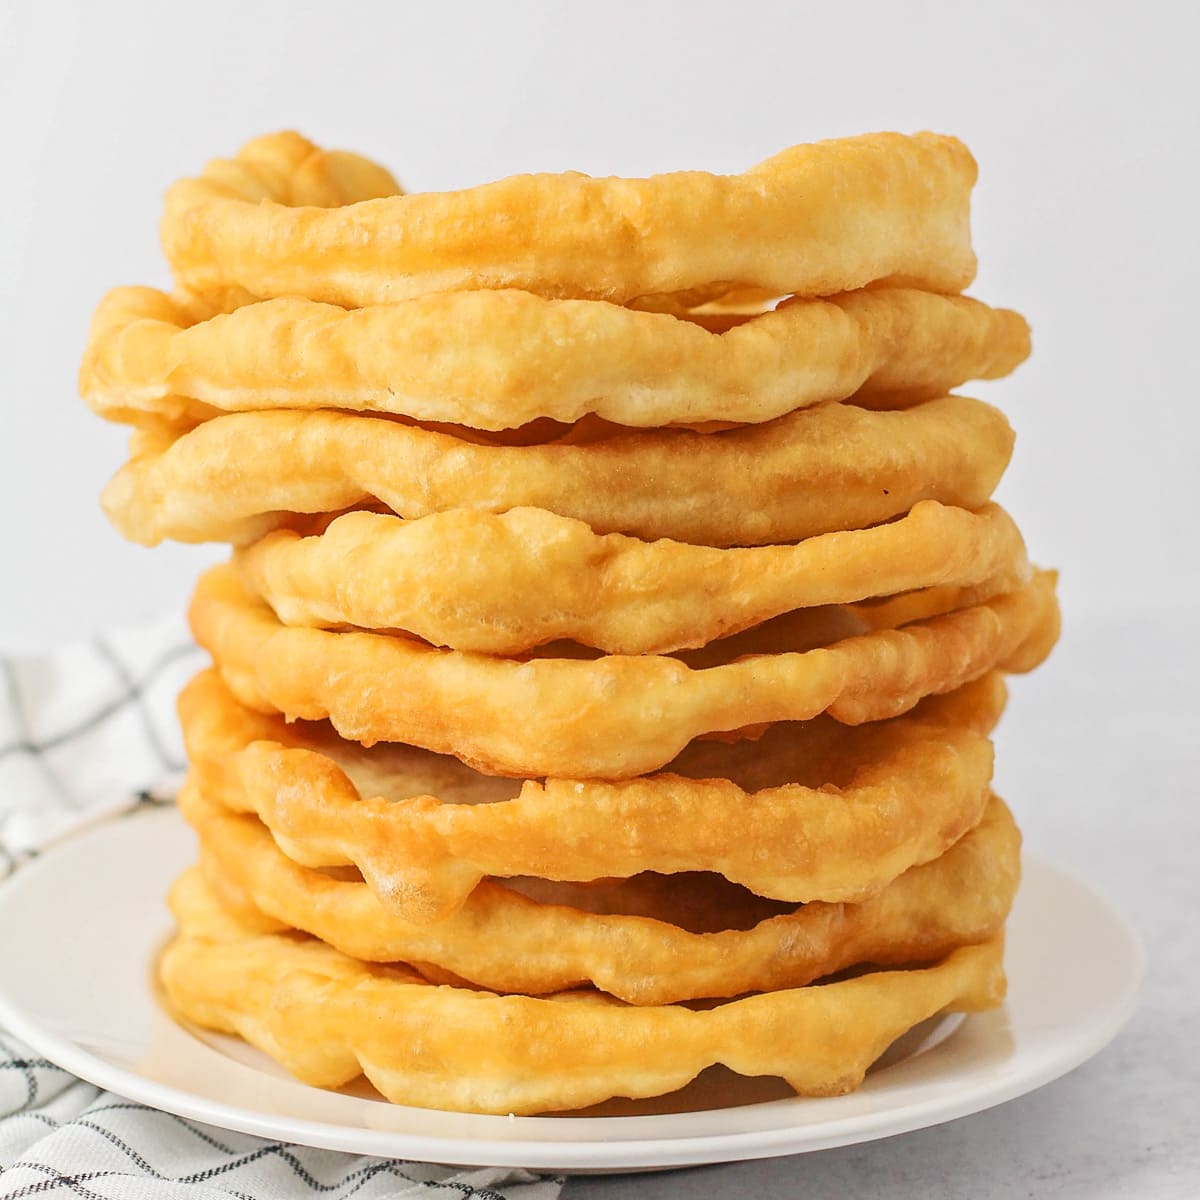 8 fry bread recipes stacked on a white plate.